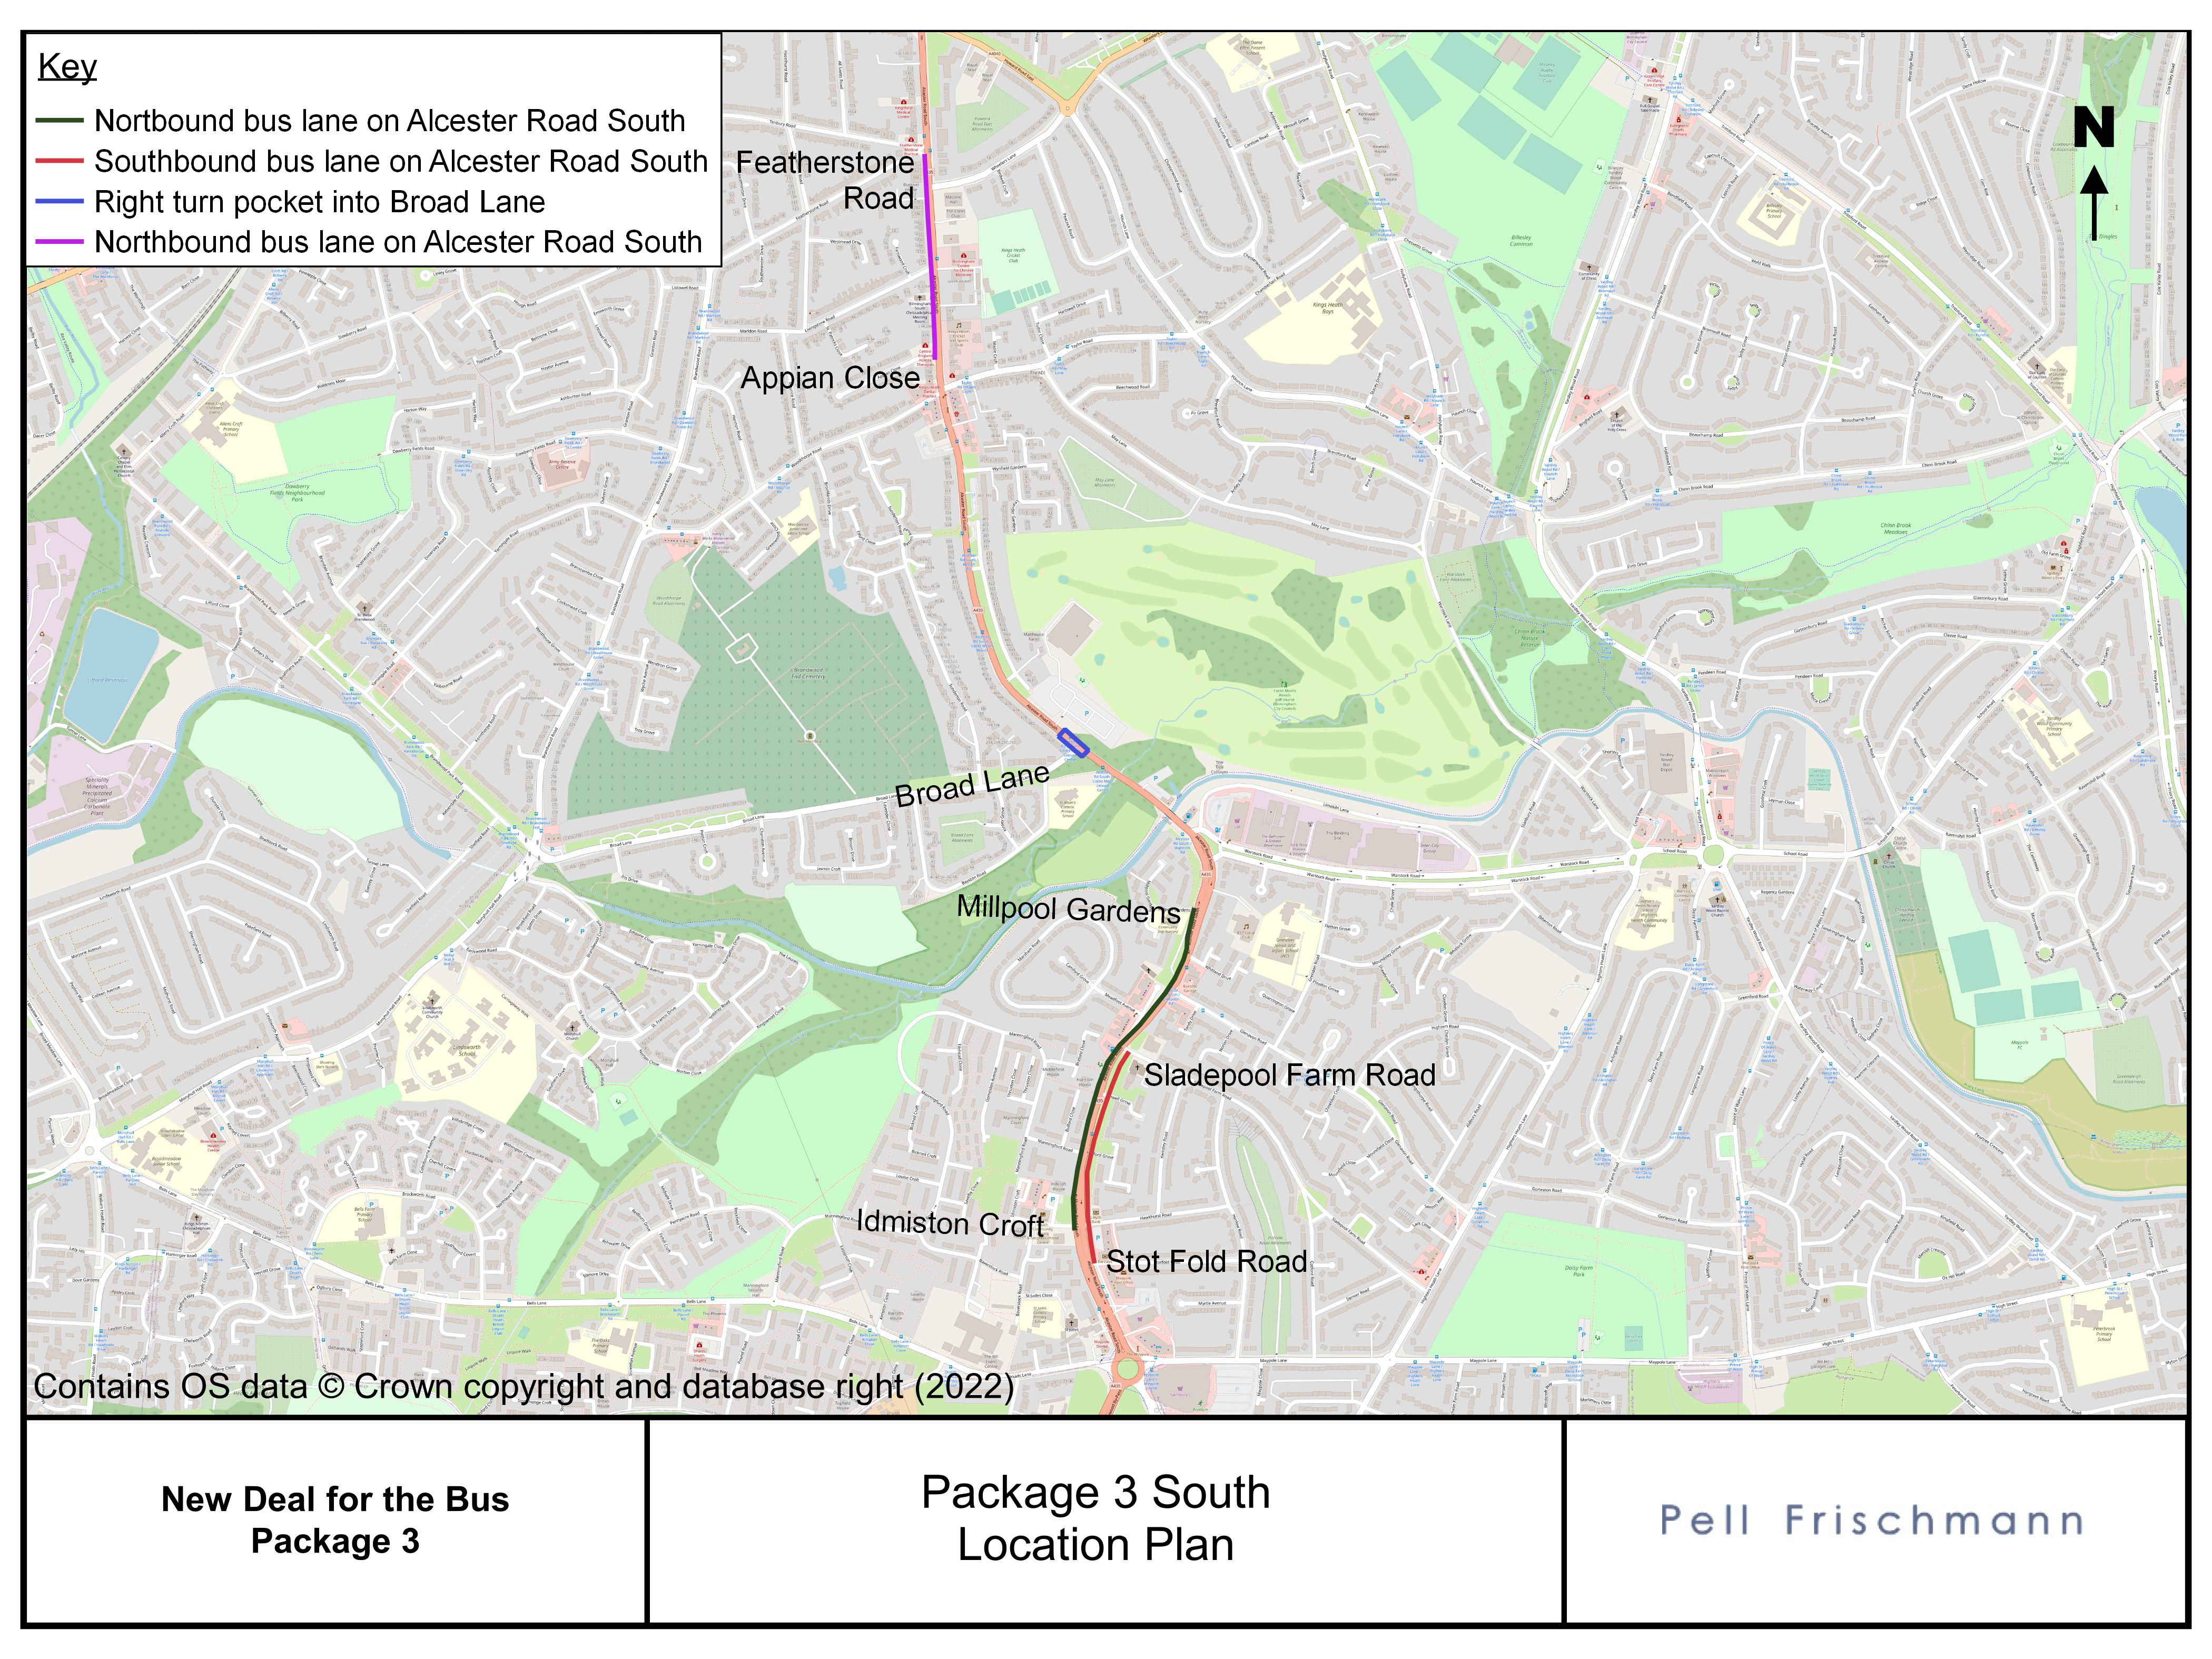 A map showing the locations and extents of the bus priority improvements on Alcester Road South.